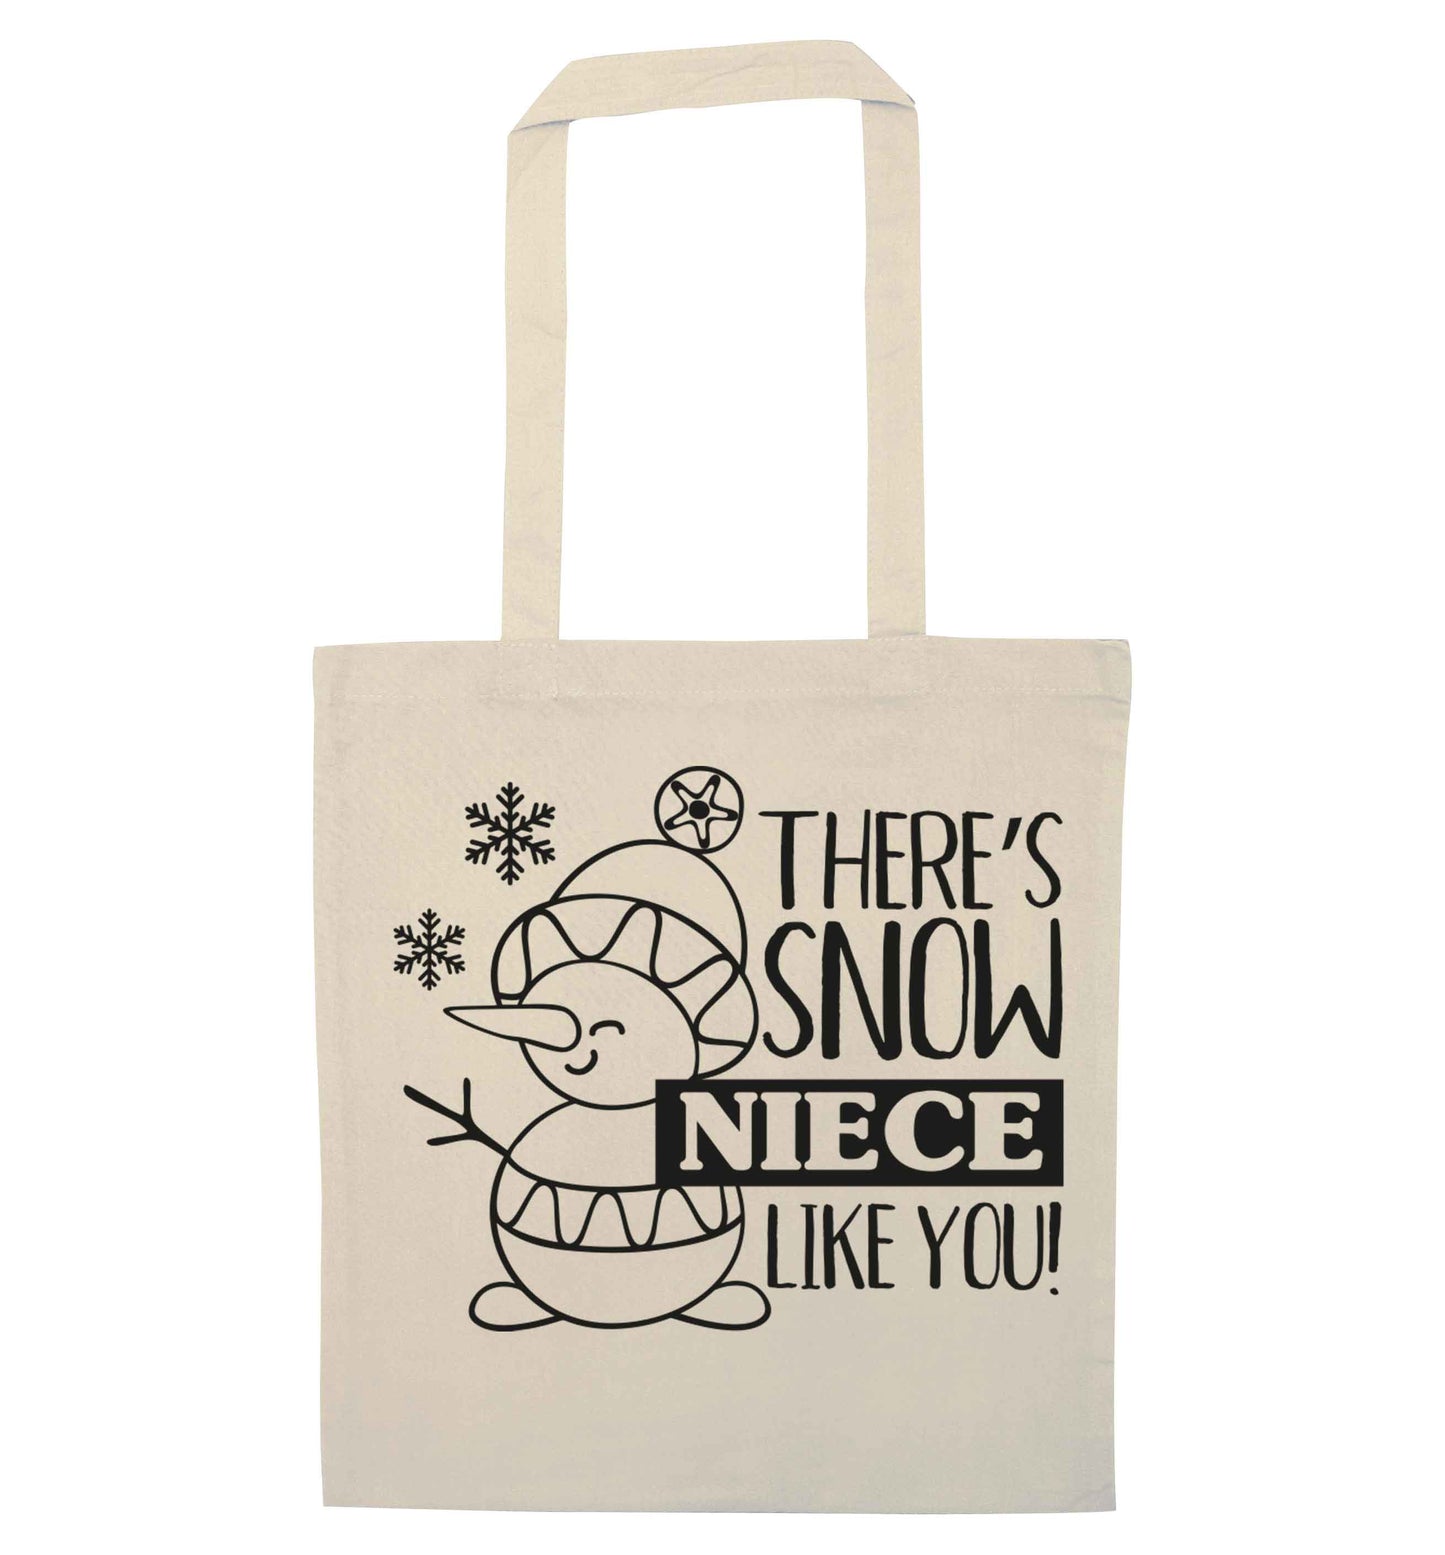 There's snow niece like you natural tote bag